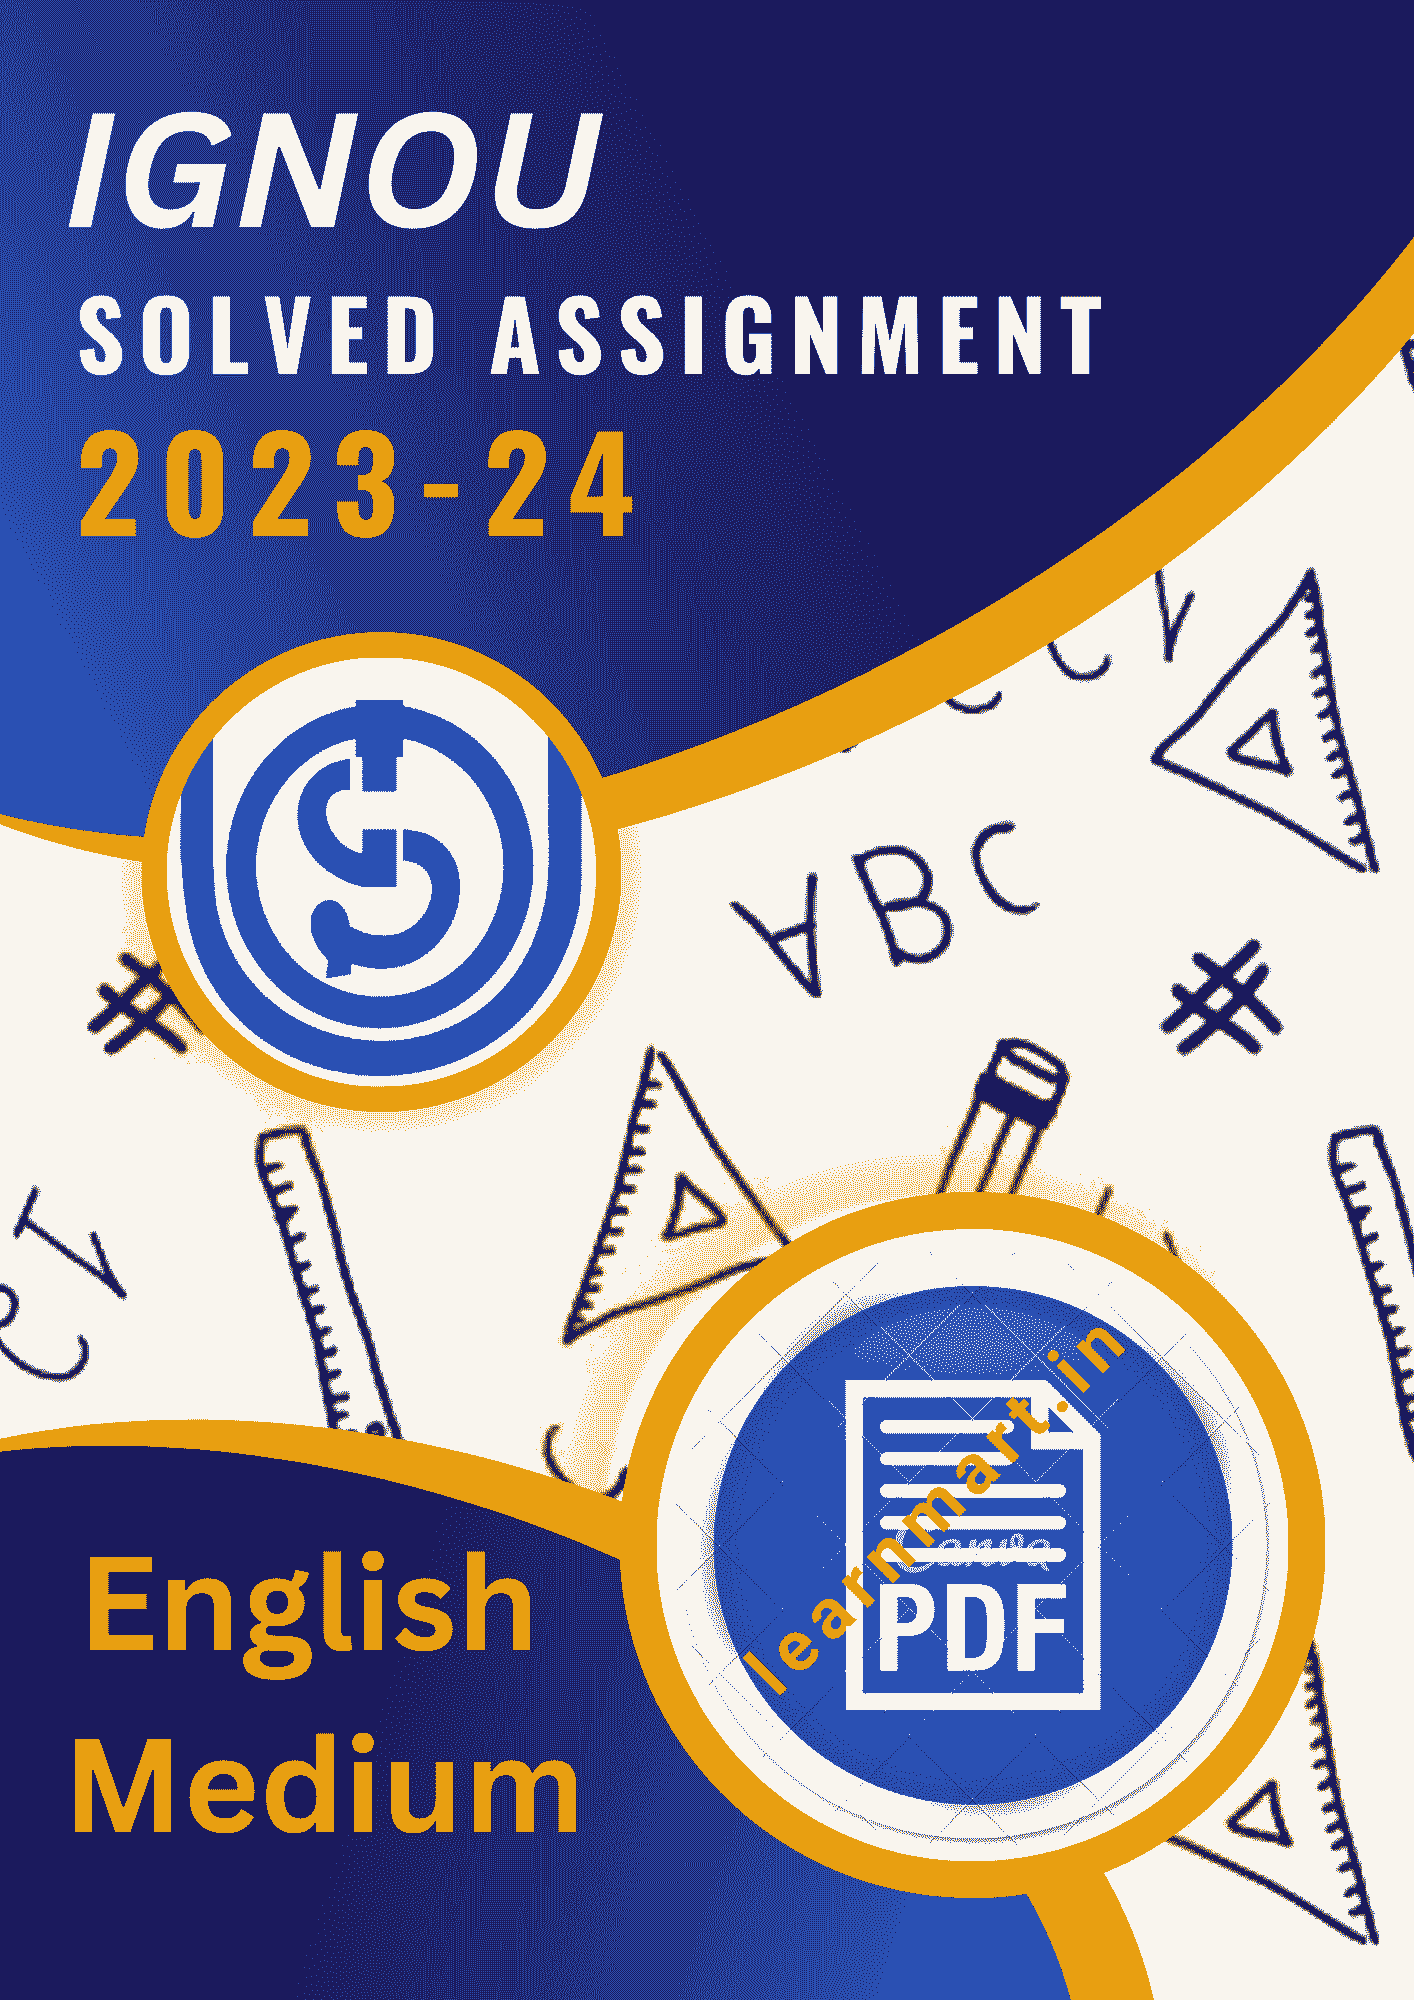 eco 09 solved assignment 2022 23